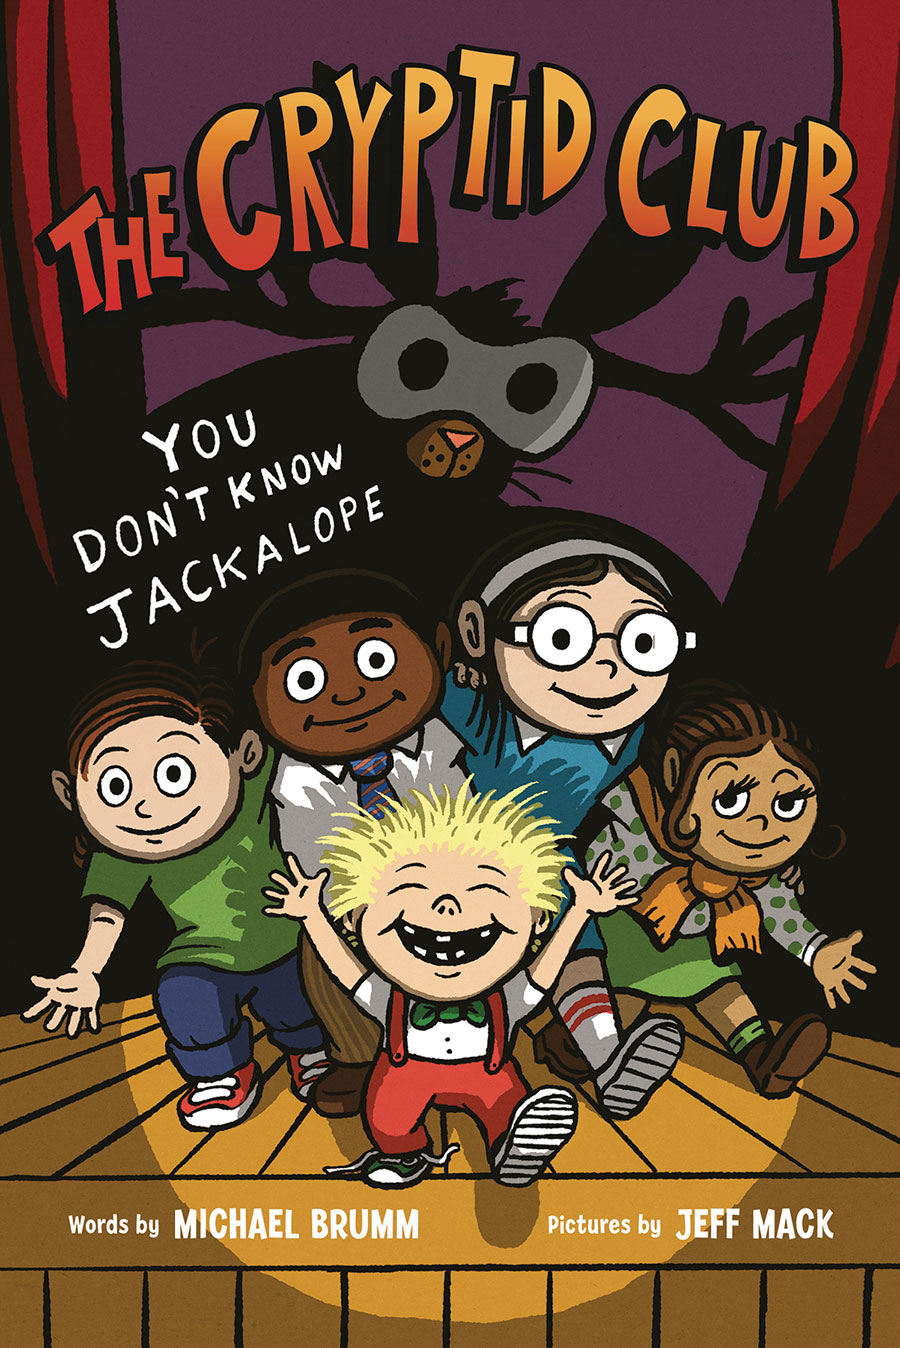 CRYPTID CLUB GN VOL 04 YOU DONT KNOW JACKALOPE (C: 0-1-0)